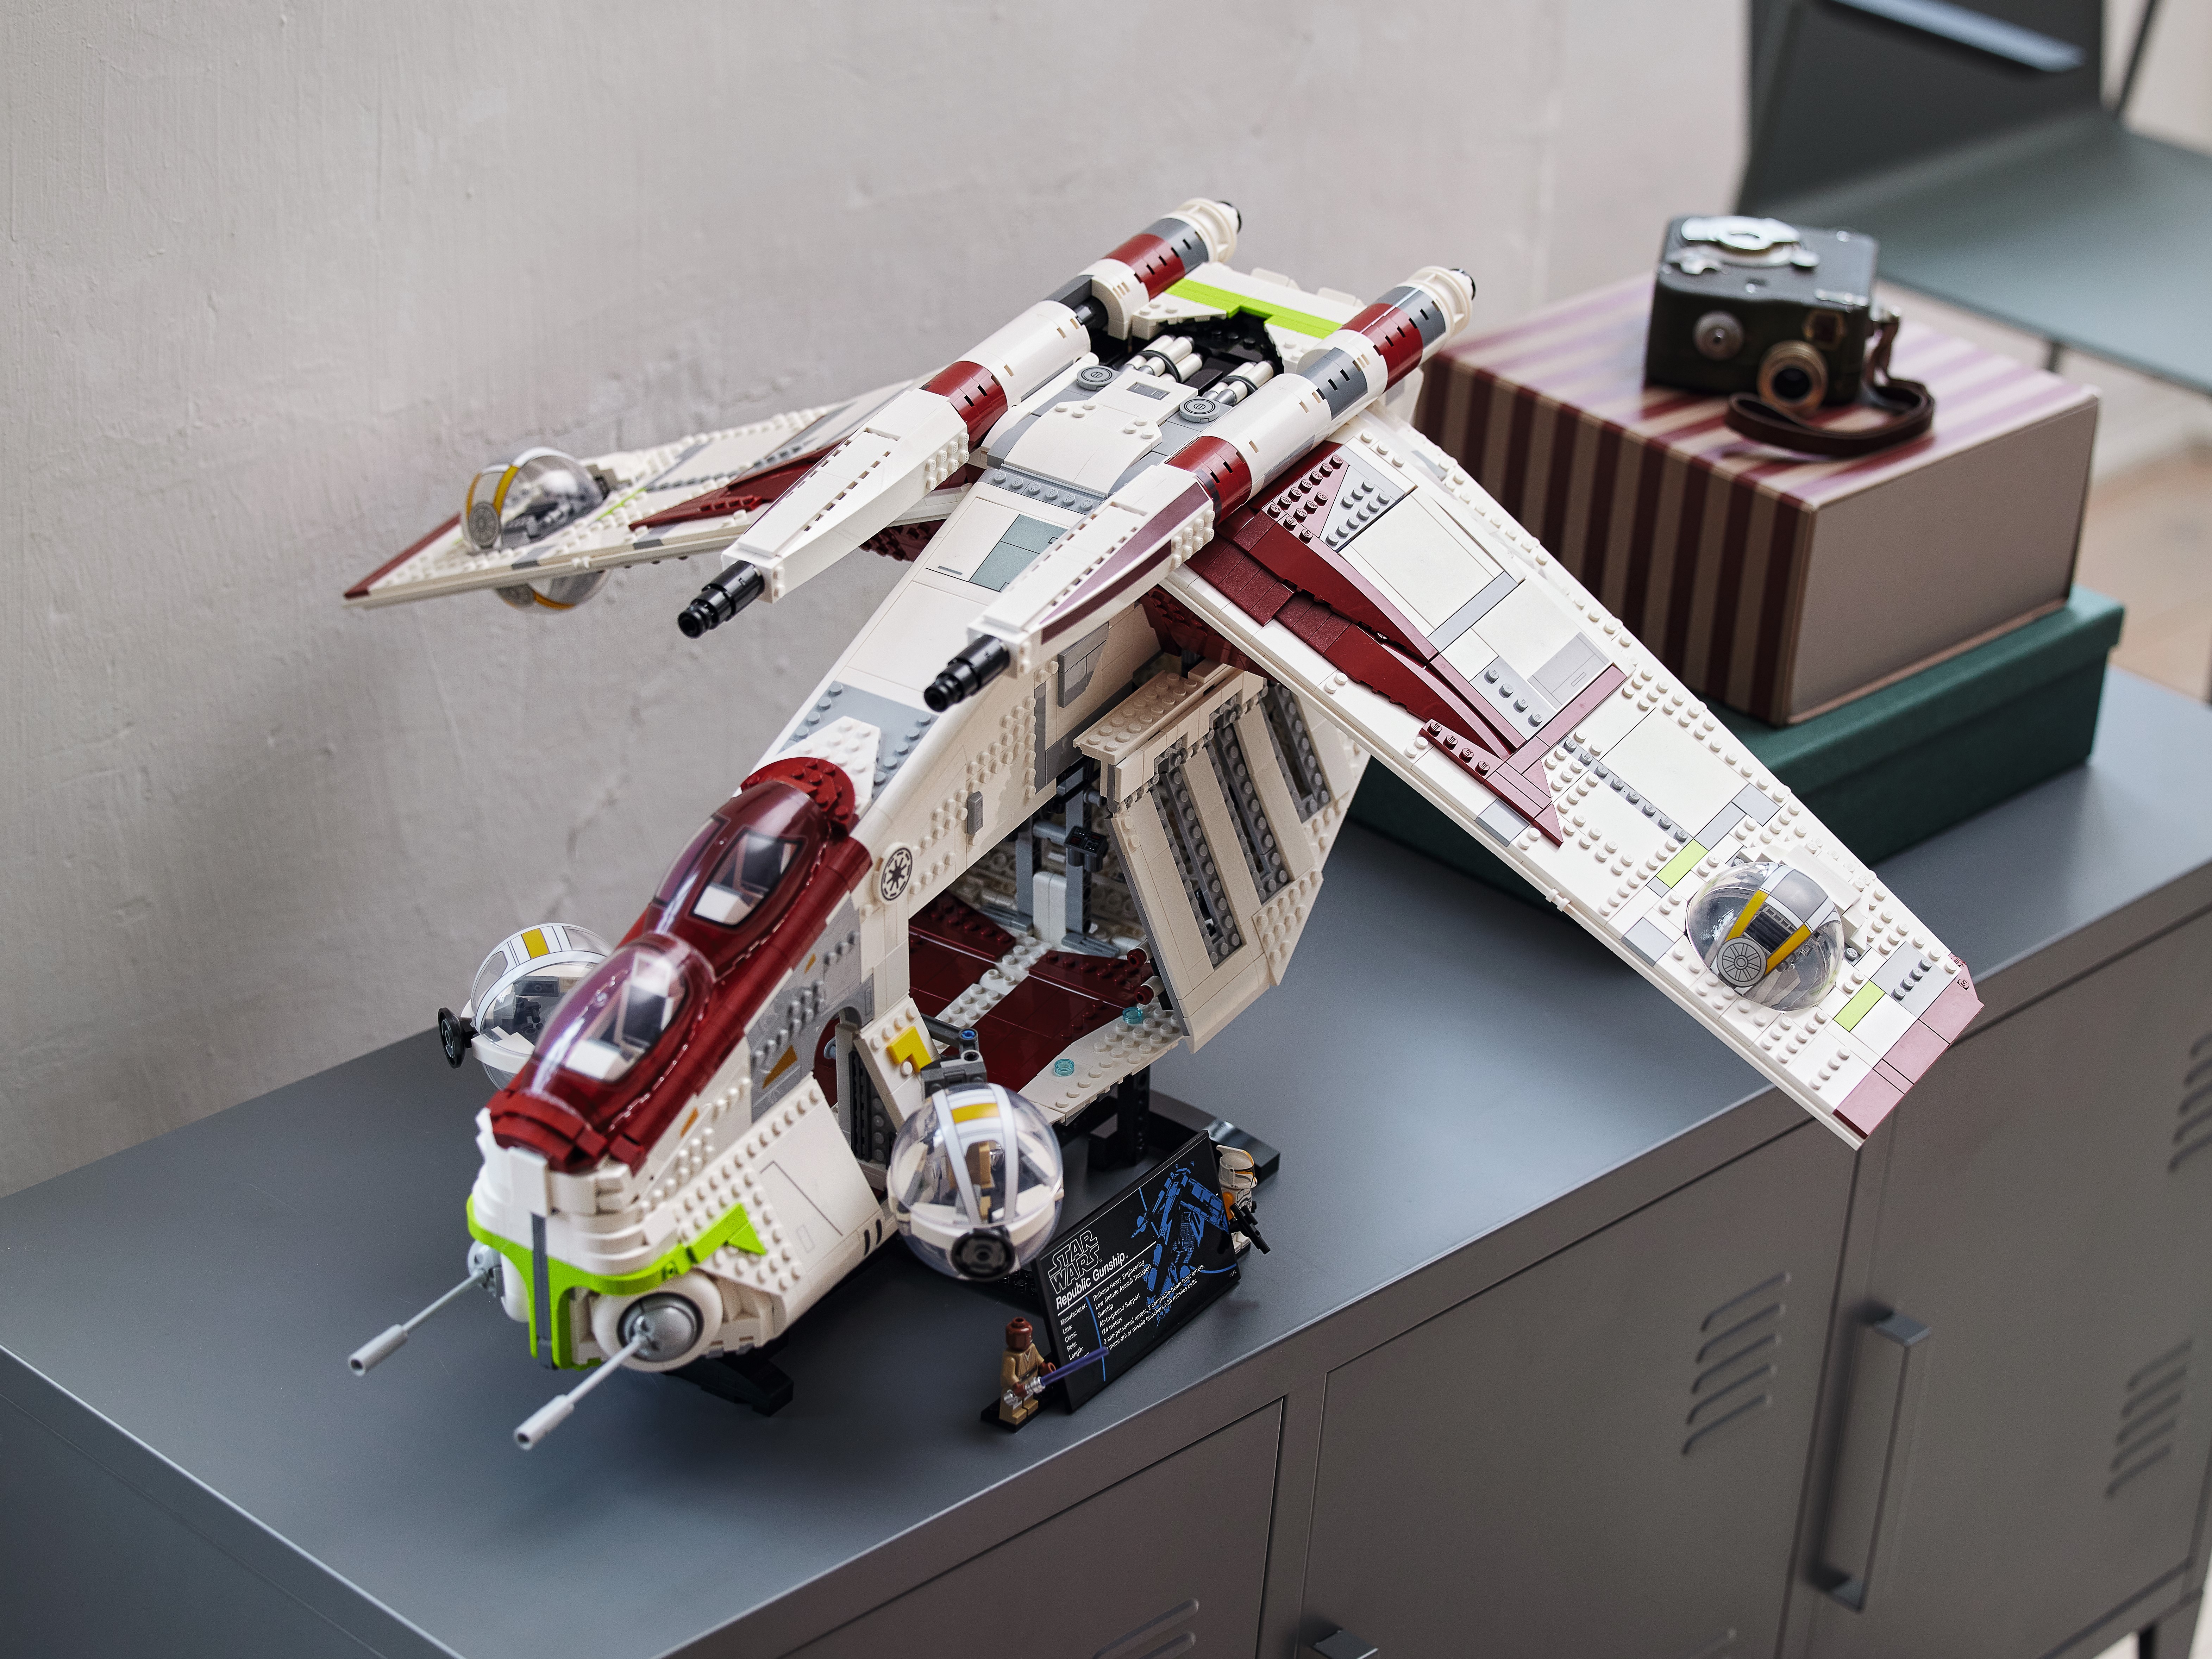 Republic 75309 | Star Wars™ | Buy online at the Official LEGO® Shop US